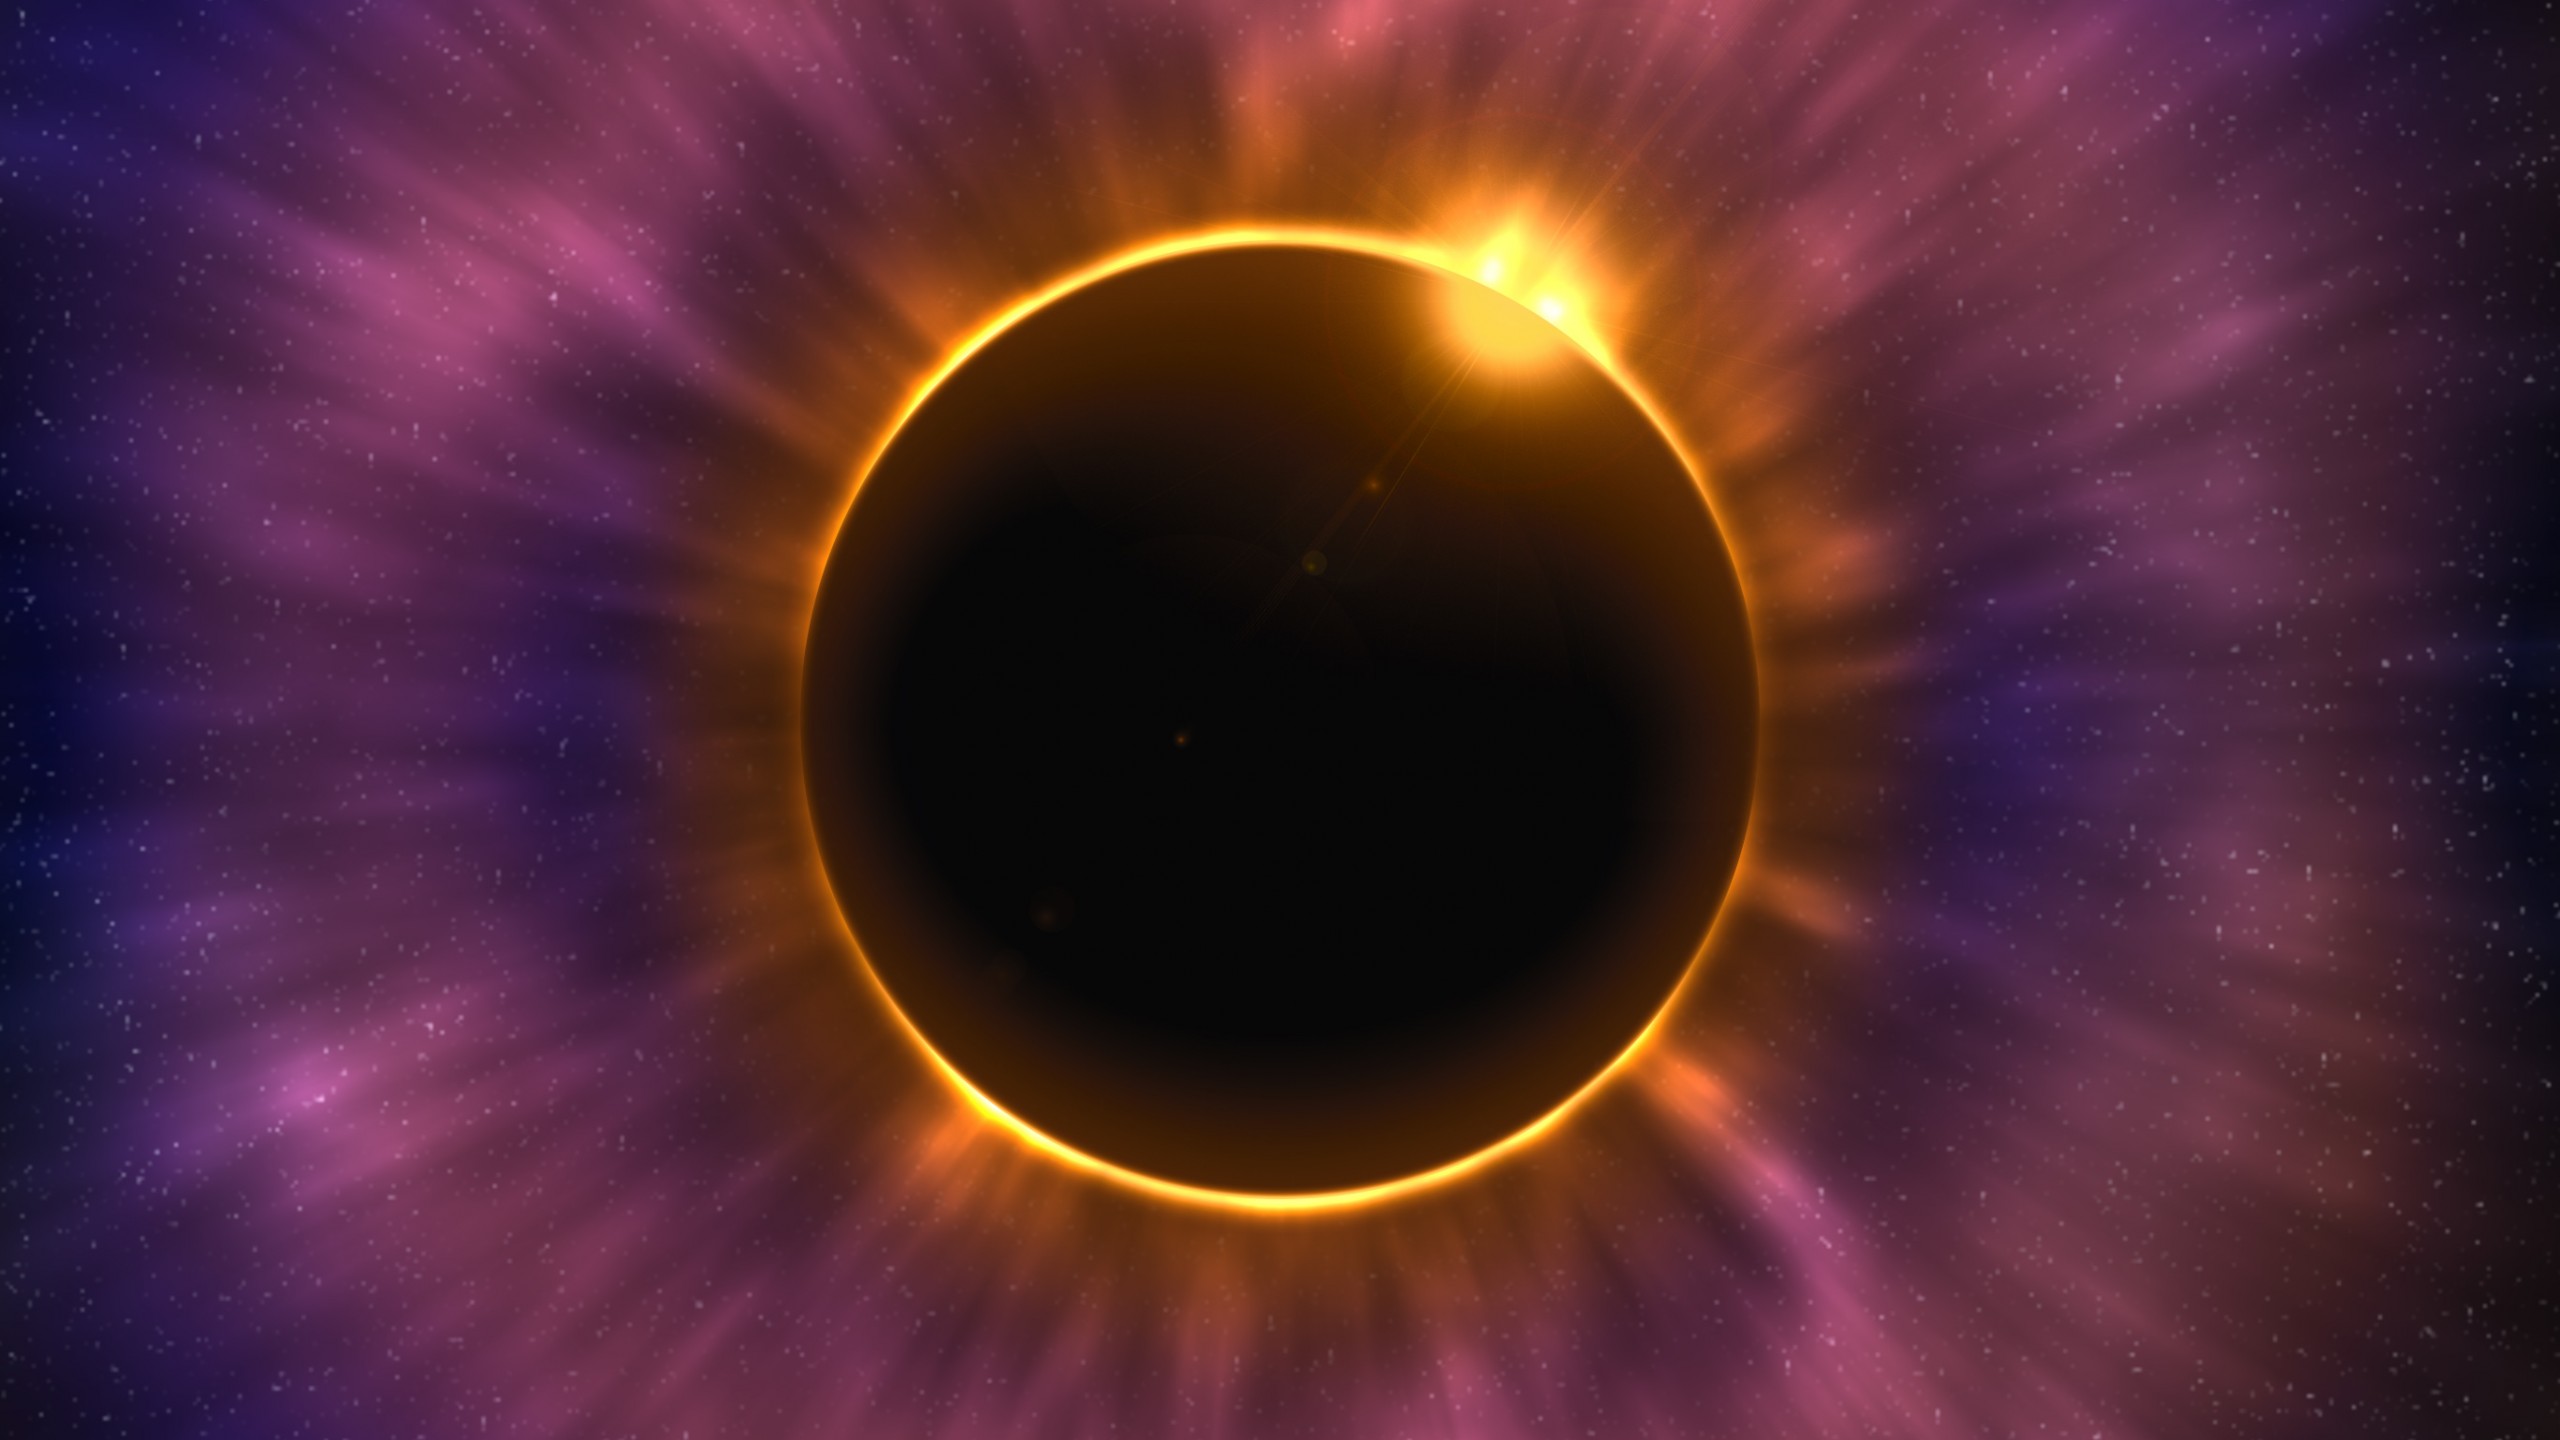 eclipse wallpaper,corona,outer space,celestial event,atmosphere,astronomical object